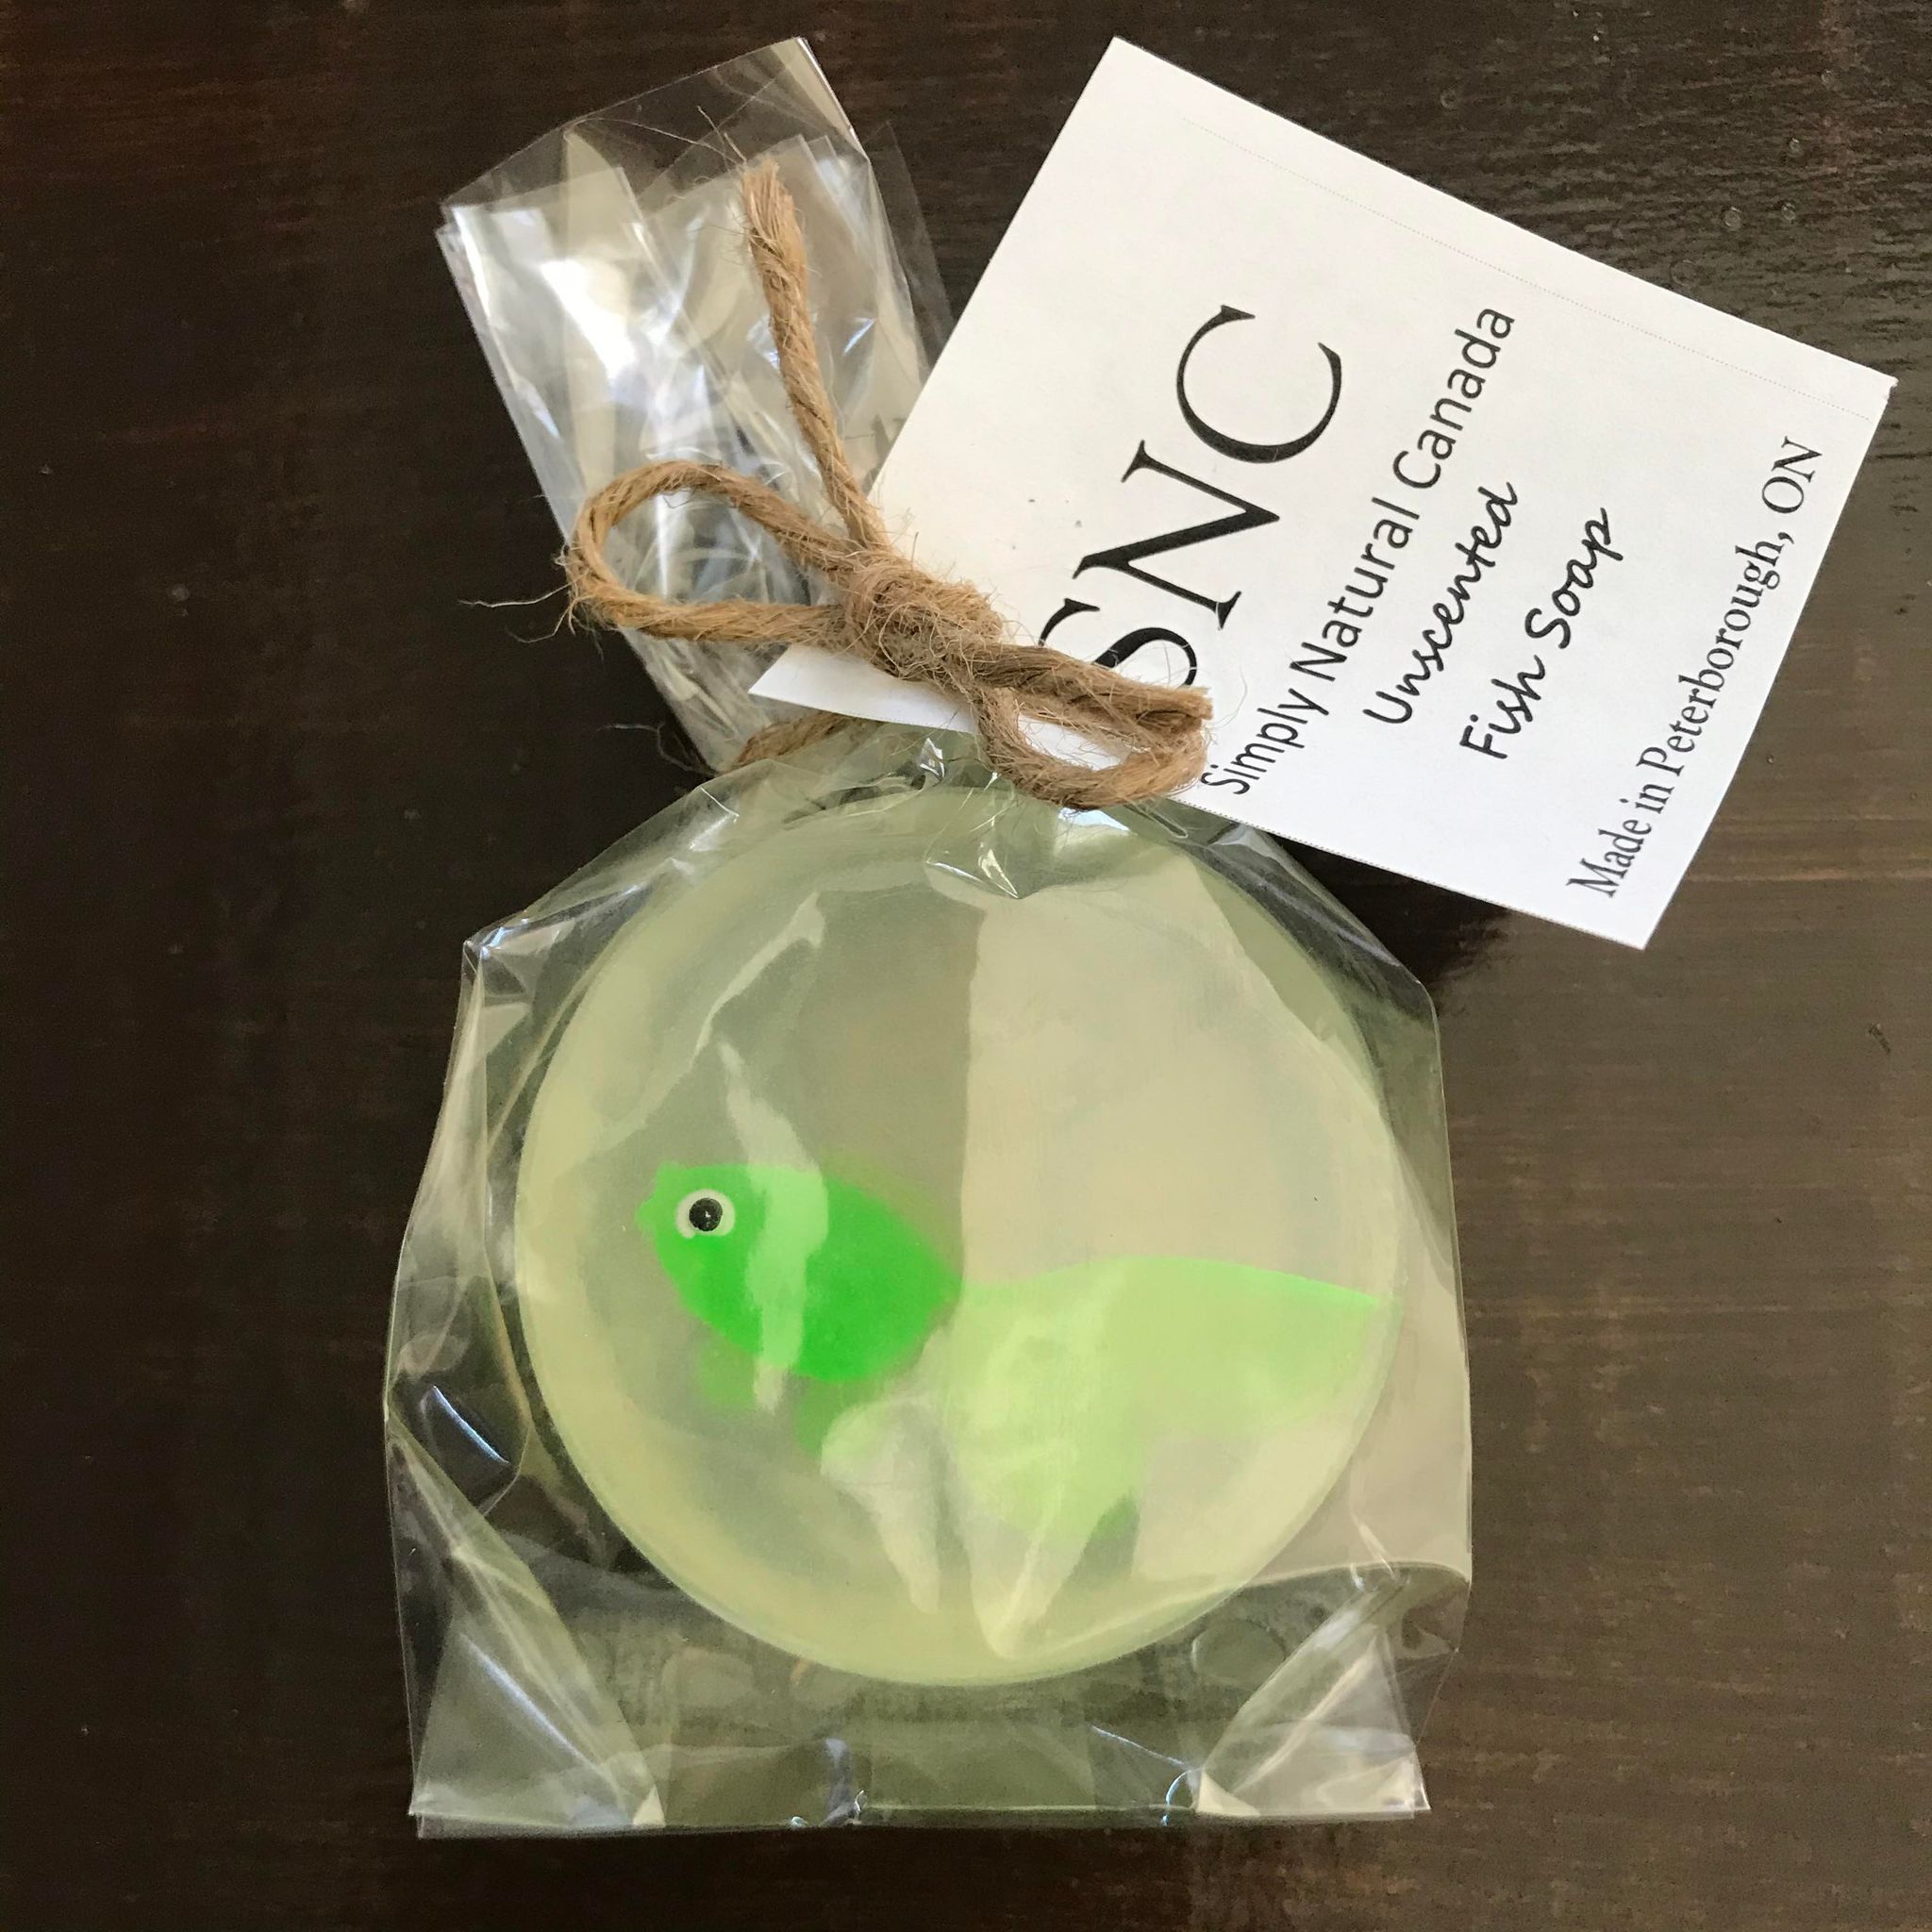 Green vinyl fish inside a clear round vegetable glycerin soap packaged inside a compostable bag and made in Canada by Simply Natural Canada